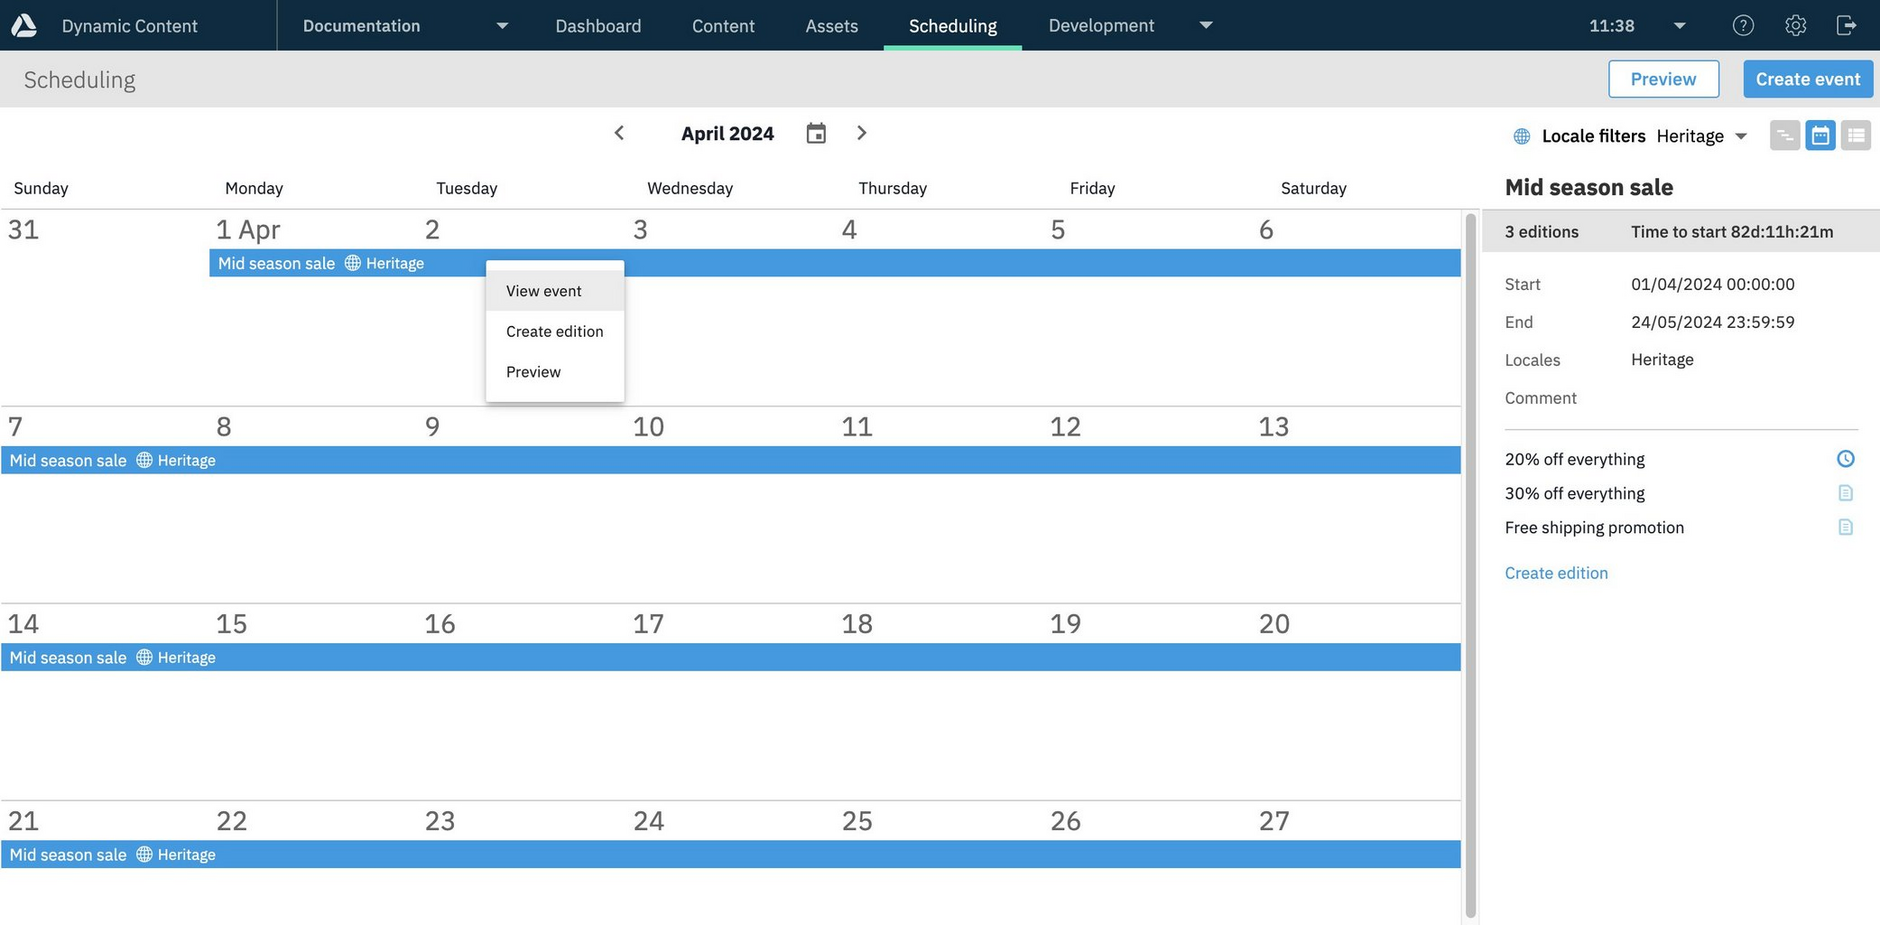 Right-click anywhere outside an existing event in the calendar to create a new one